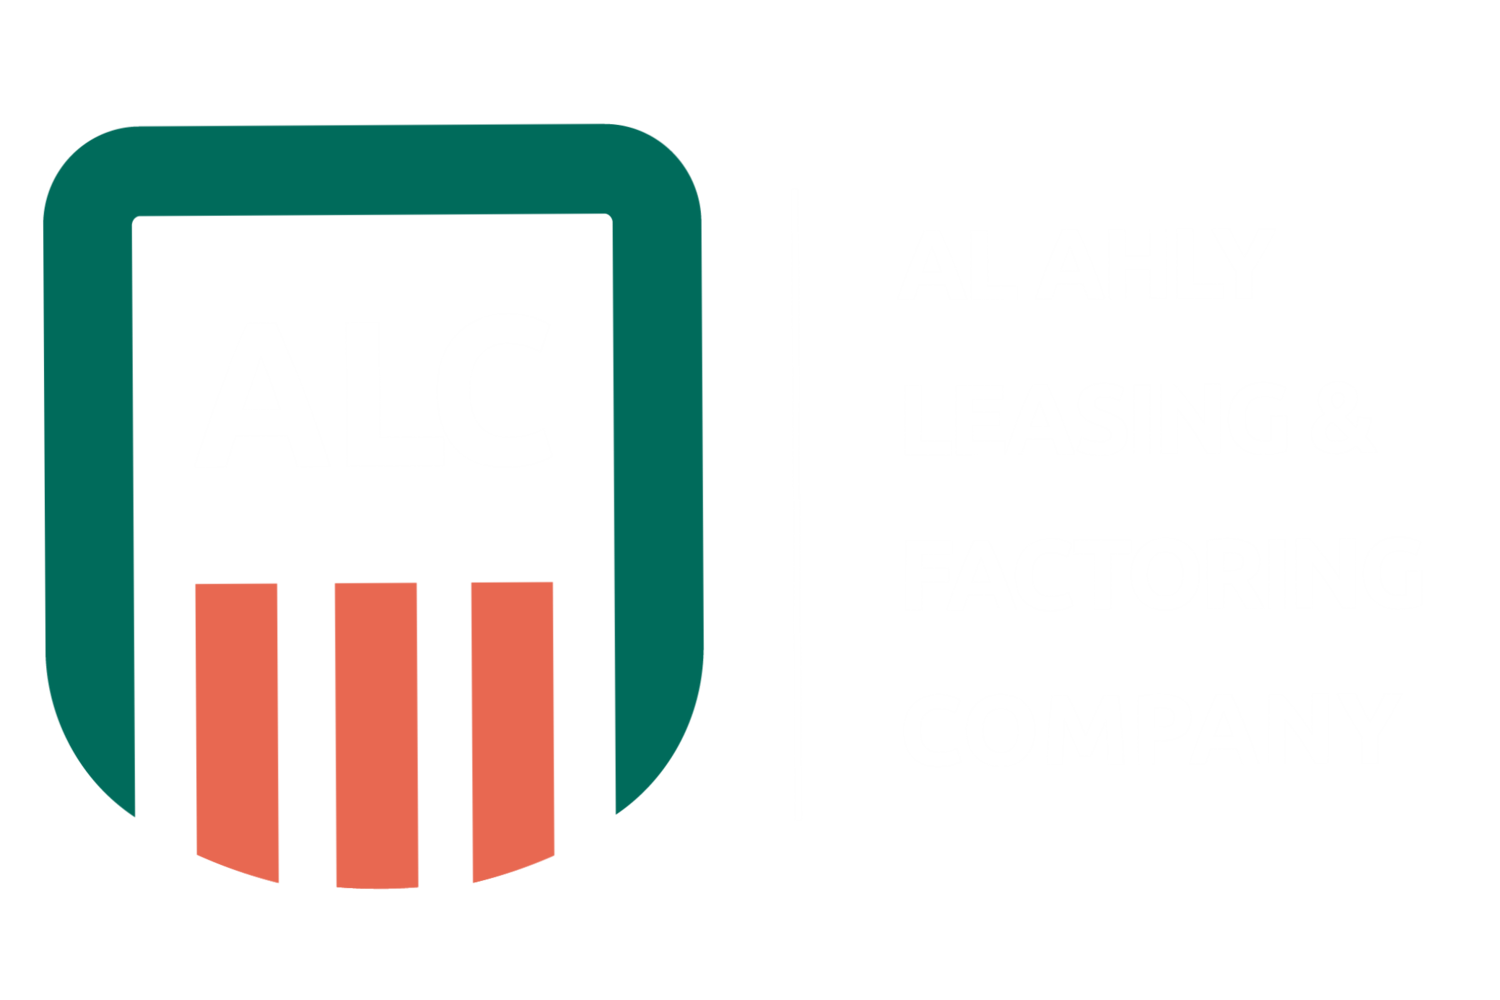 Al Ahly Leasing and Factoring Company